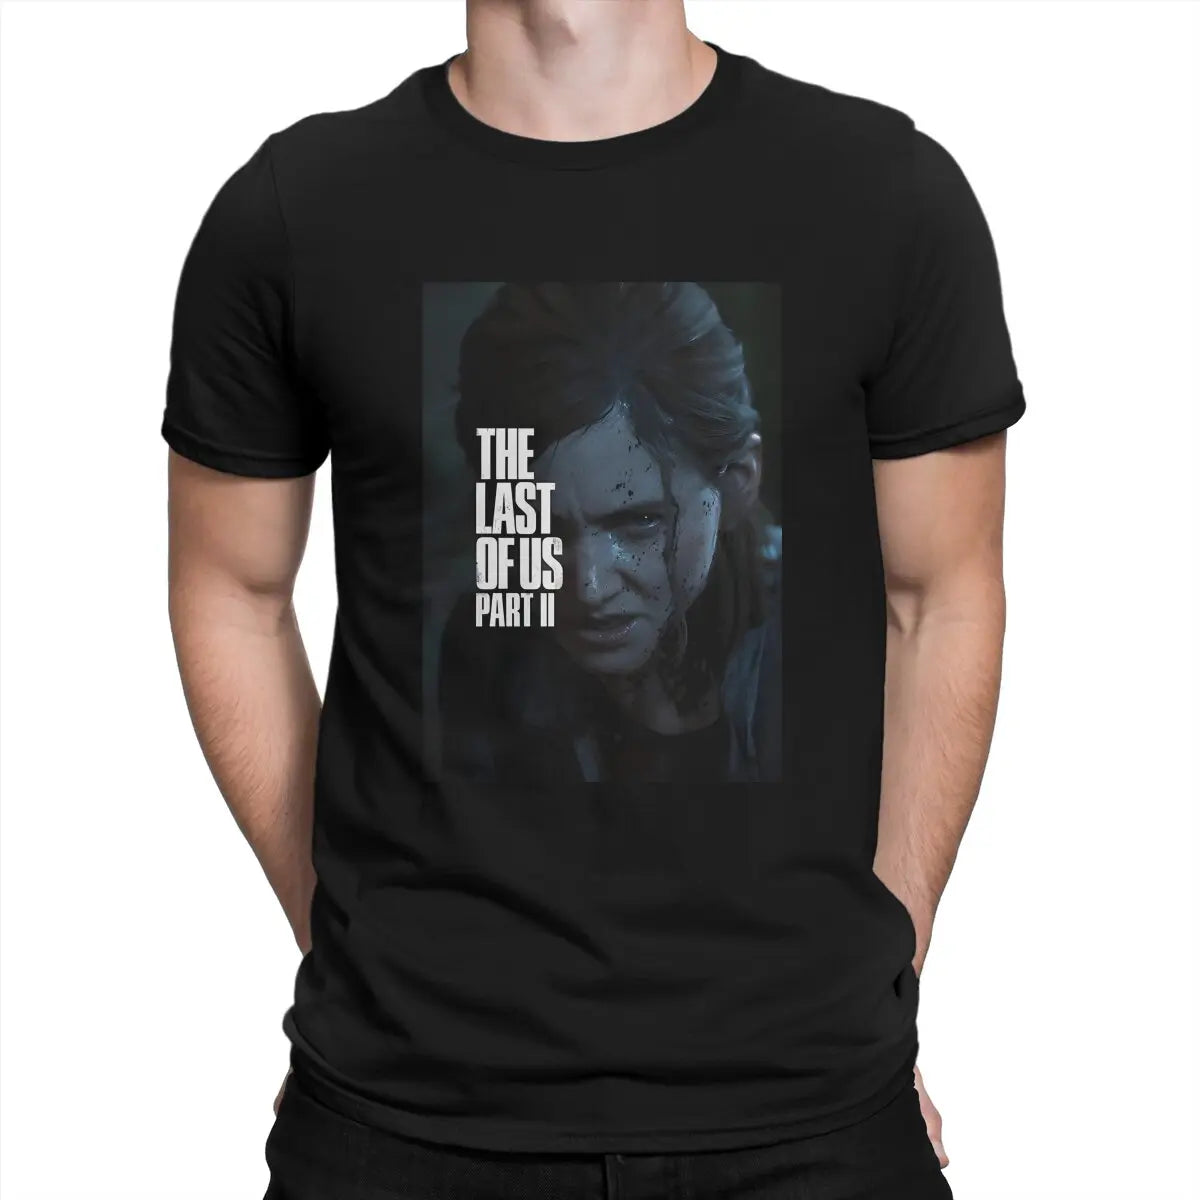 The Last of Us Part II Ellie Williams Tshirt - Black / XXL Available at 2Fast2See.co